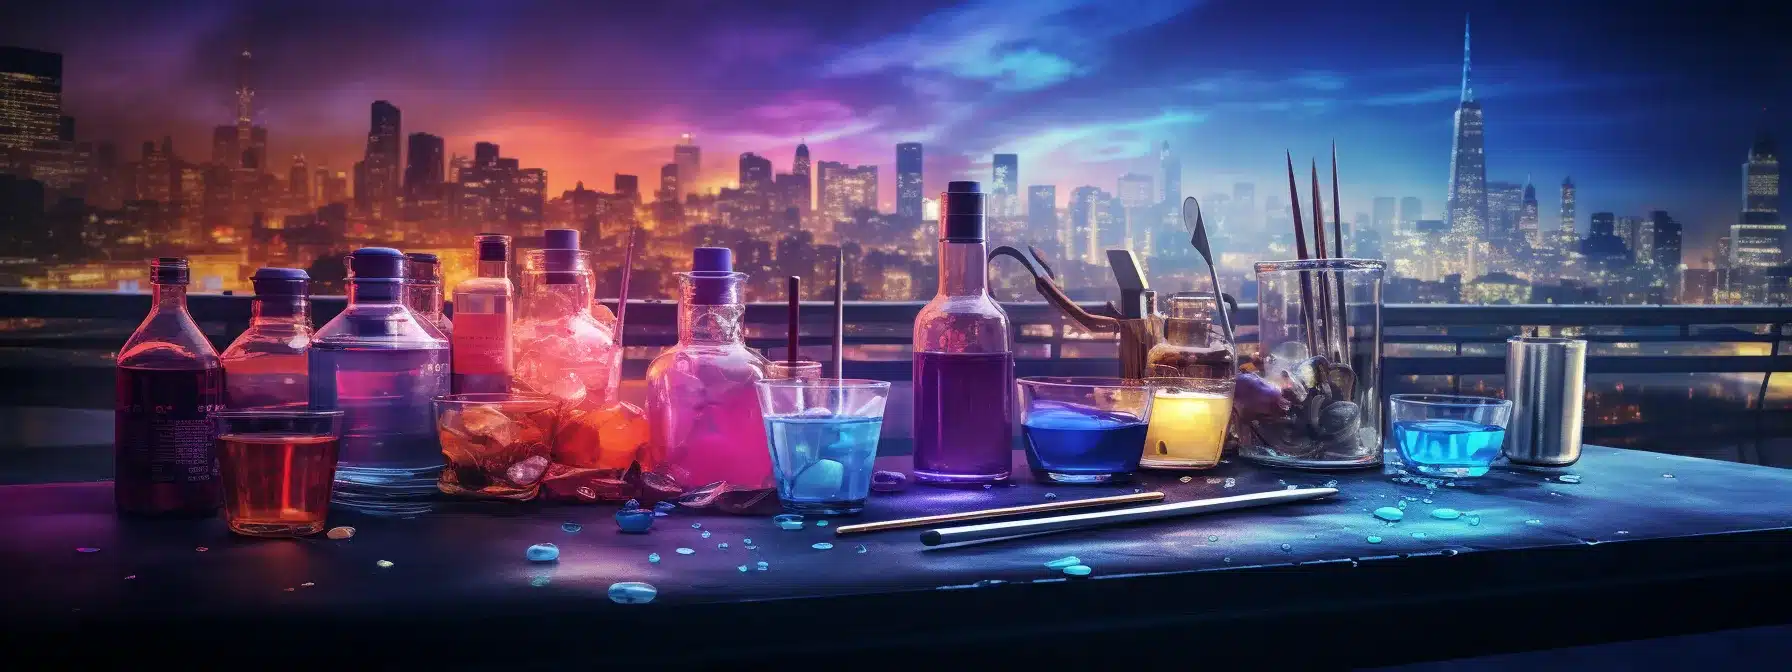 A Vibrant Cityscape With Dazzling Lights Representing Graphic Design Elements, Surrounded By A Master Painter'S Palette Filled With Vibrant Colors And A Potion Master Concocting An Irresistibly Sweet Syrup.